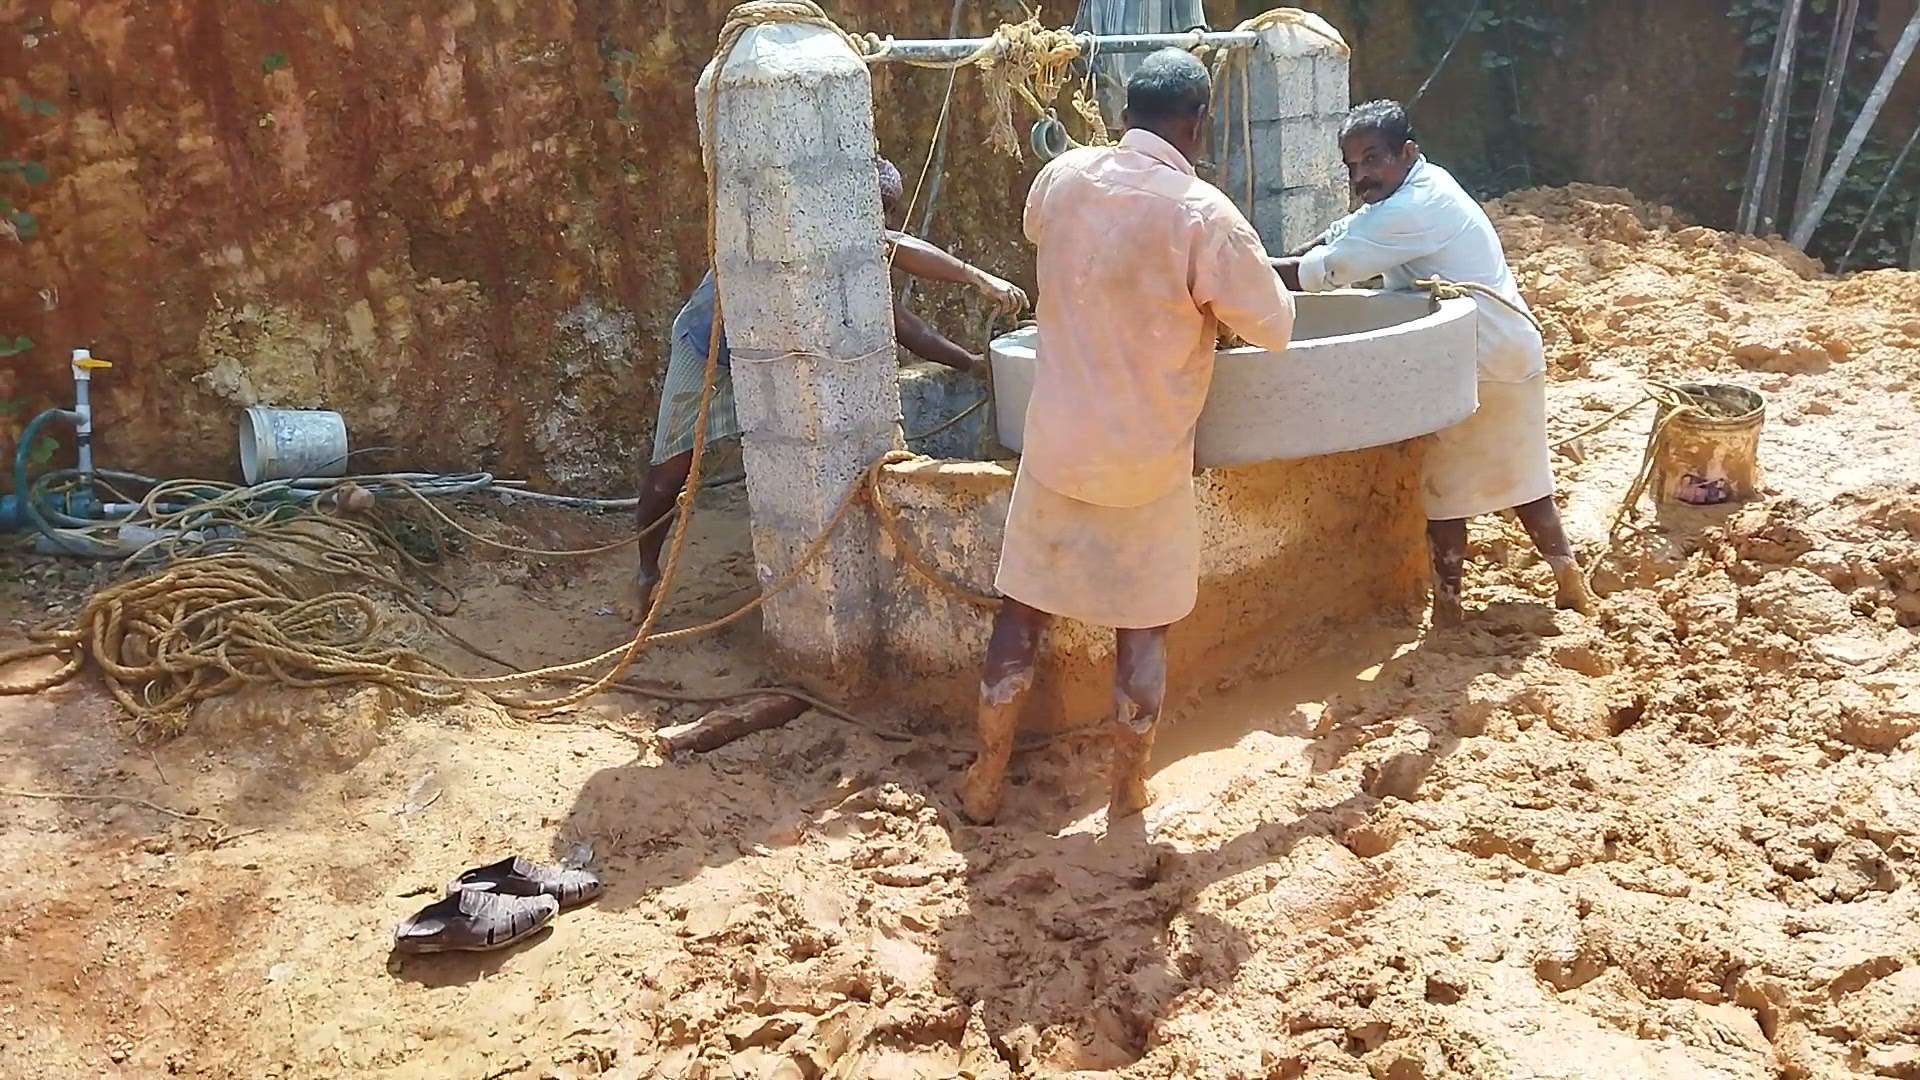 kinar ring work and septic tank work contact